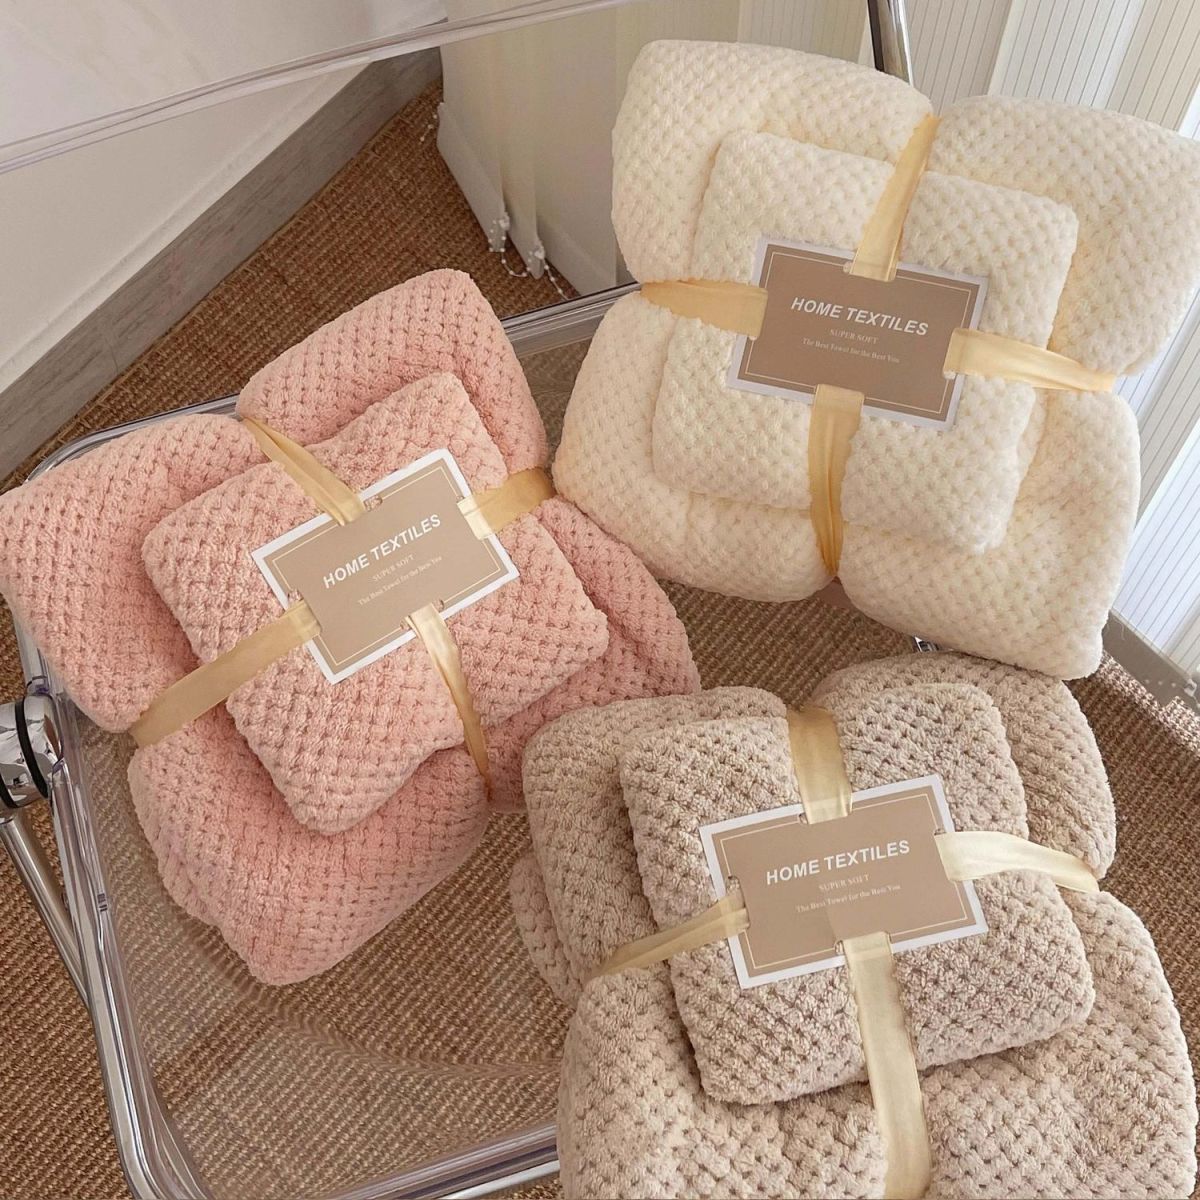 [Over 10,000 sold] A two-piece set of bath towels and towels that are more absorbent than pure cotton. It dries quickly for adults and children and does not shed hair